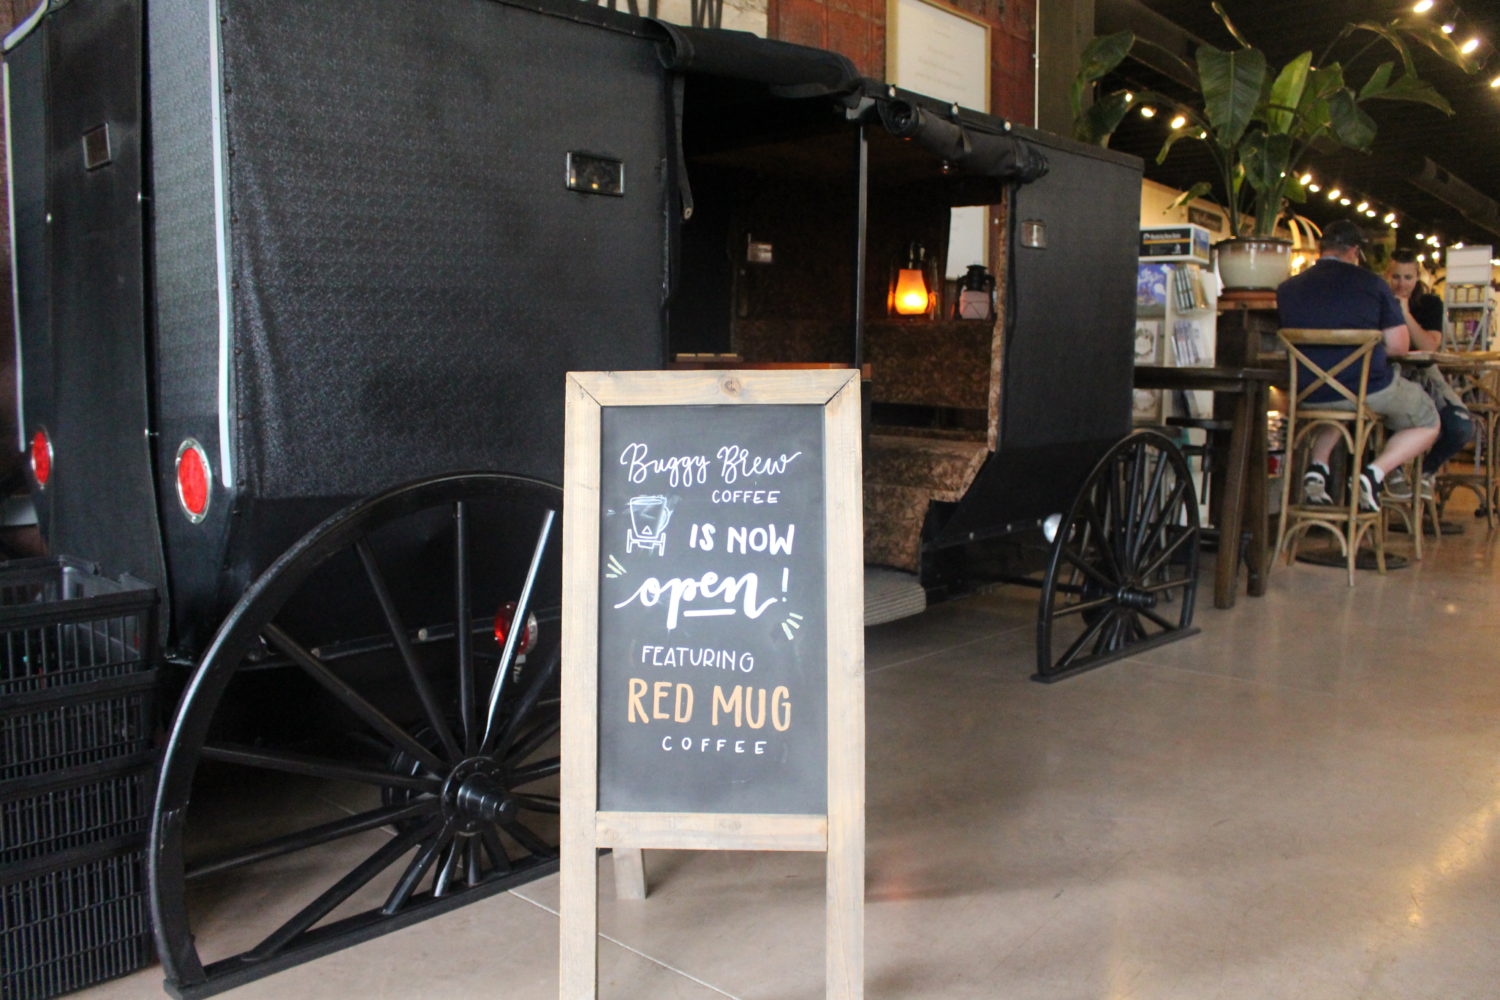 A popular photo spot, the Sheiyah Market buggy indicates that the Buggy Brew coffee shop is open for business.